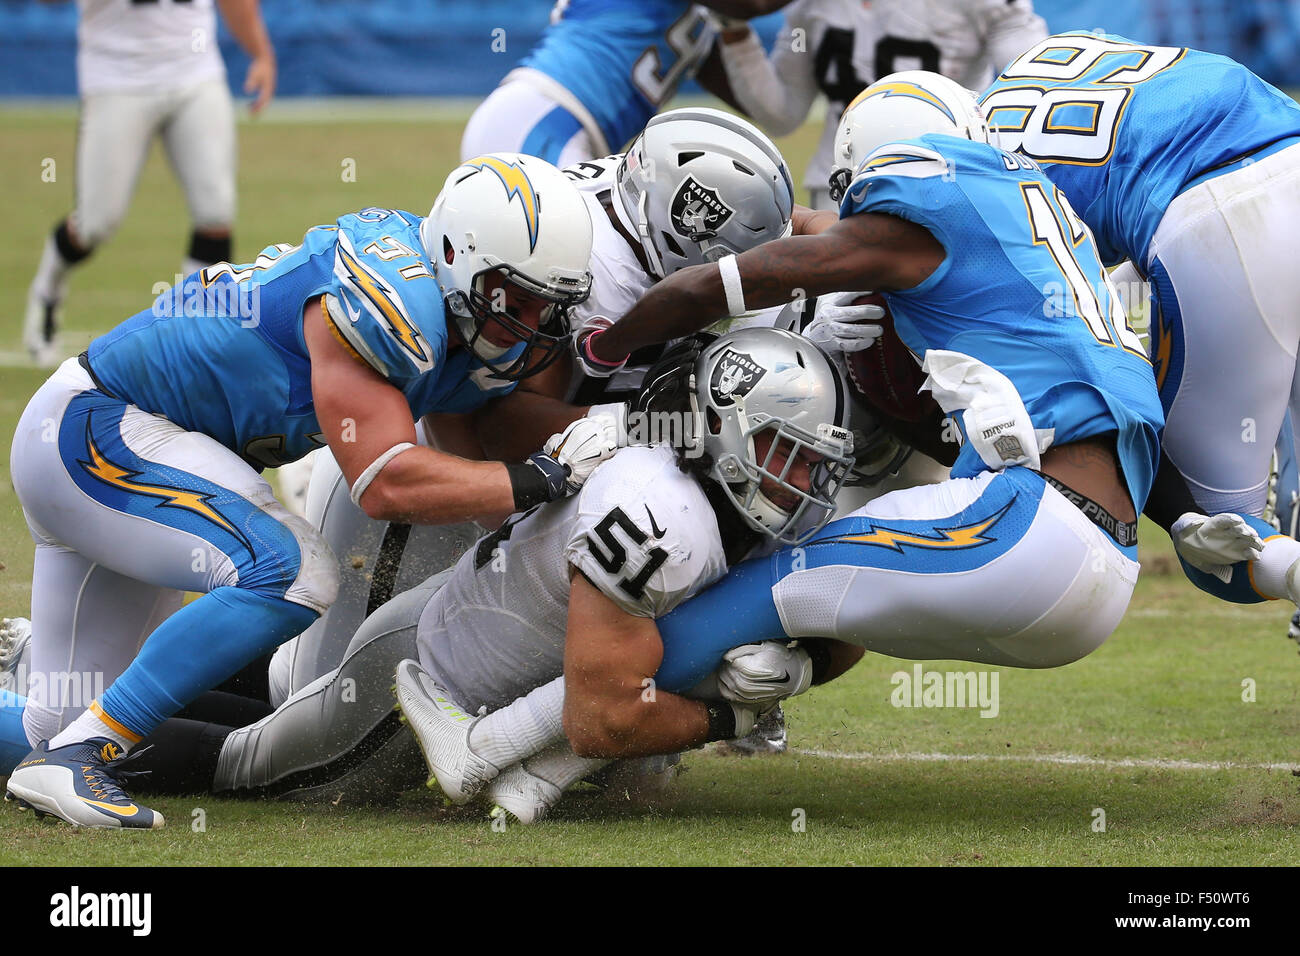 San Diego, CA, USA. 25th Oct, 2015. October 25, 2015: Oakland Raiders inside linebacker Ben Heeney (51) and two teammates makes a hard hit on San Diego Chargers wide receiver Jacoby Jones (12) in the game between the Oakland Raiders and San Diego Chargers, Qualcomm Stadium, San Diego, CA. Photographer: Peter Joneleit/ ZUMA Wire Service Credit:  Peter Joneleit/ZUMA Wire/Alamy Live News Stock Photo